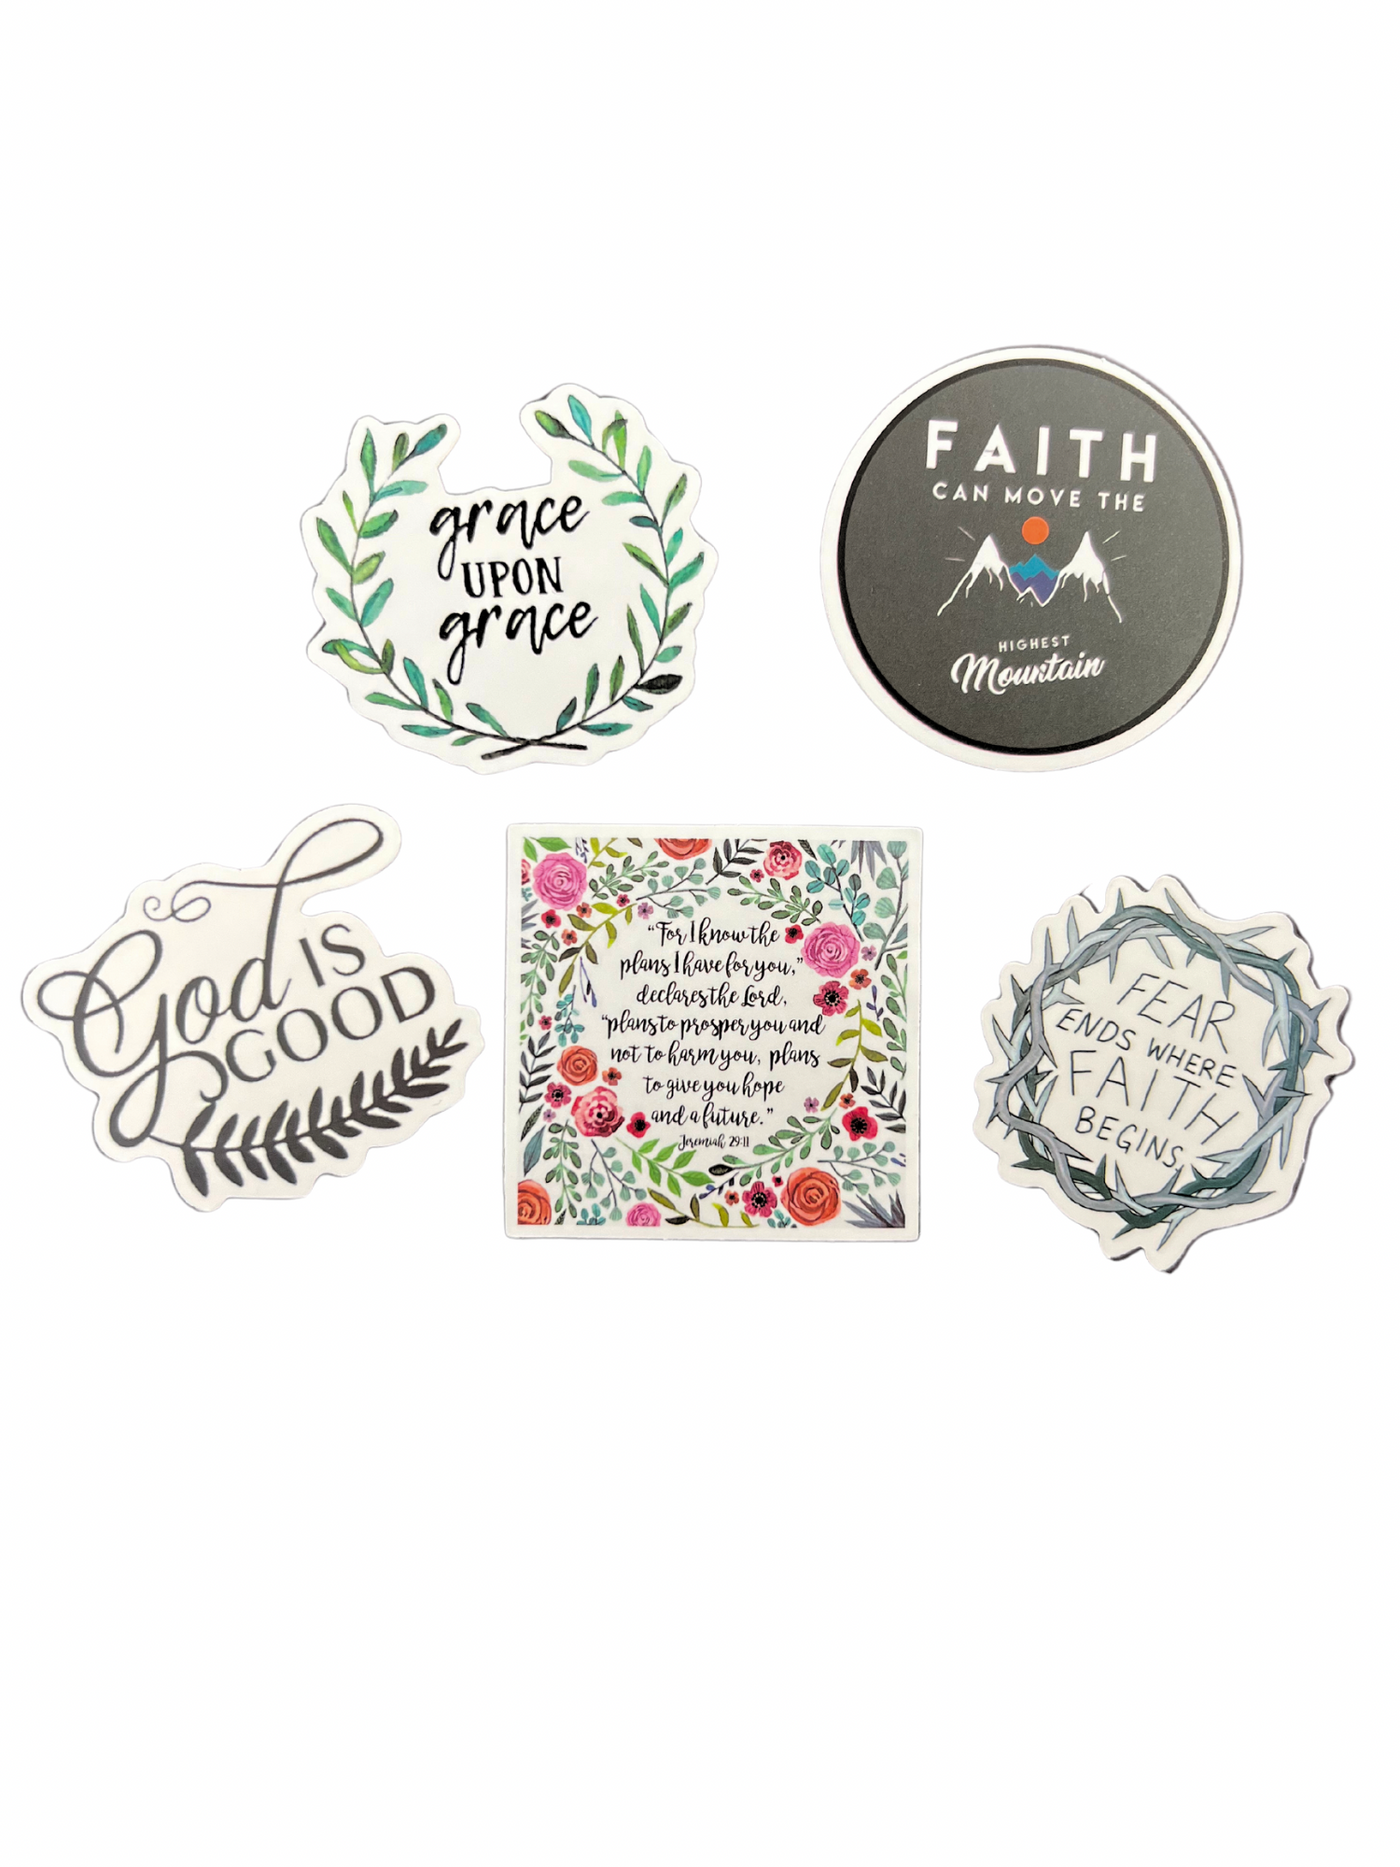 Set of 5 Christian Stickers in green/floral on white background.